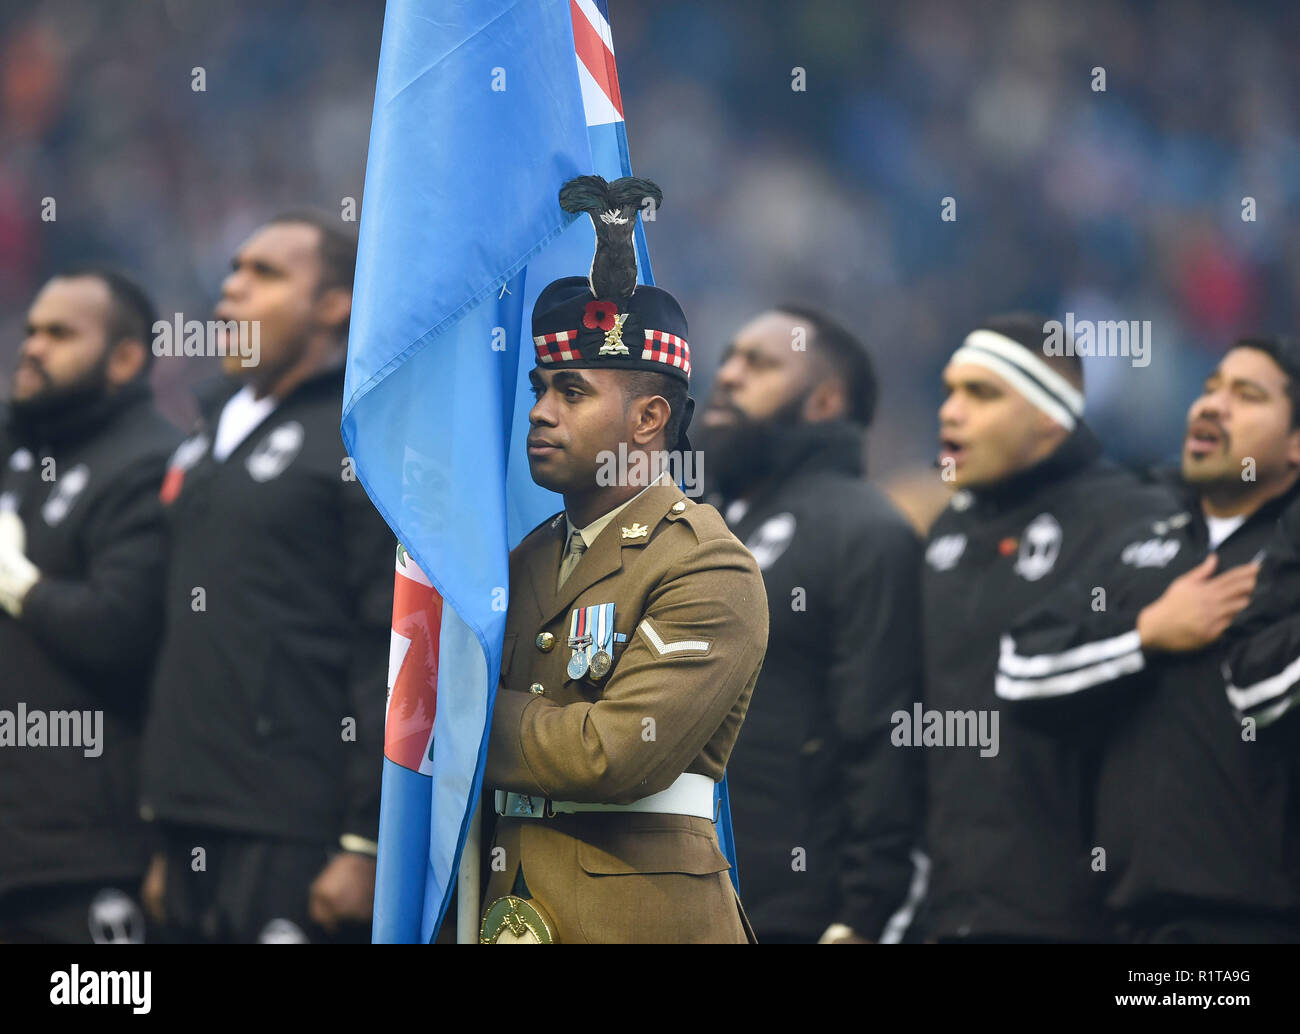 Scottish soldier holds the Fijian flag during national anthems during the Autumn International match at BT Murrayfield Stadium, Edinburgh. PRESS ASSOCIATION Photo. Picture date: Saturday November 10, 2018. See PA story RUGBYU Scotland. Photo credit should read: Ian Rutherford/PA Wire. Stock Photo